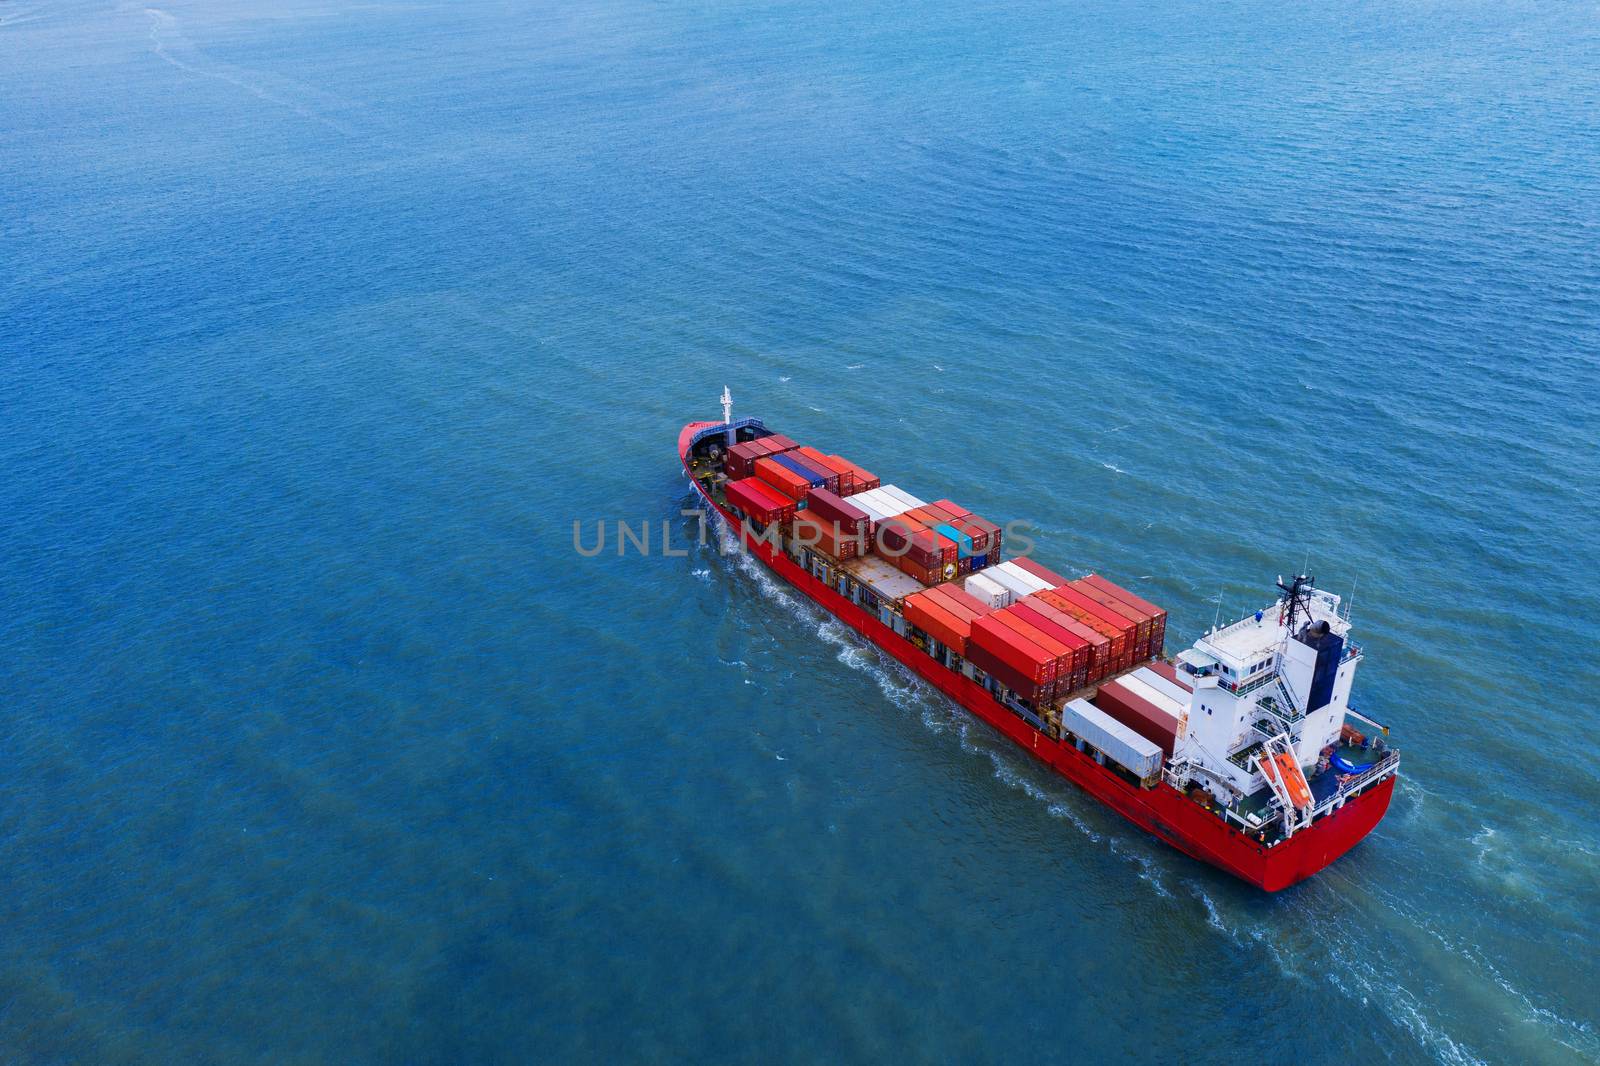 Aerial view of container cargo ship in sea.